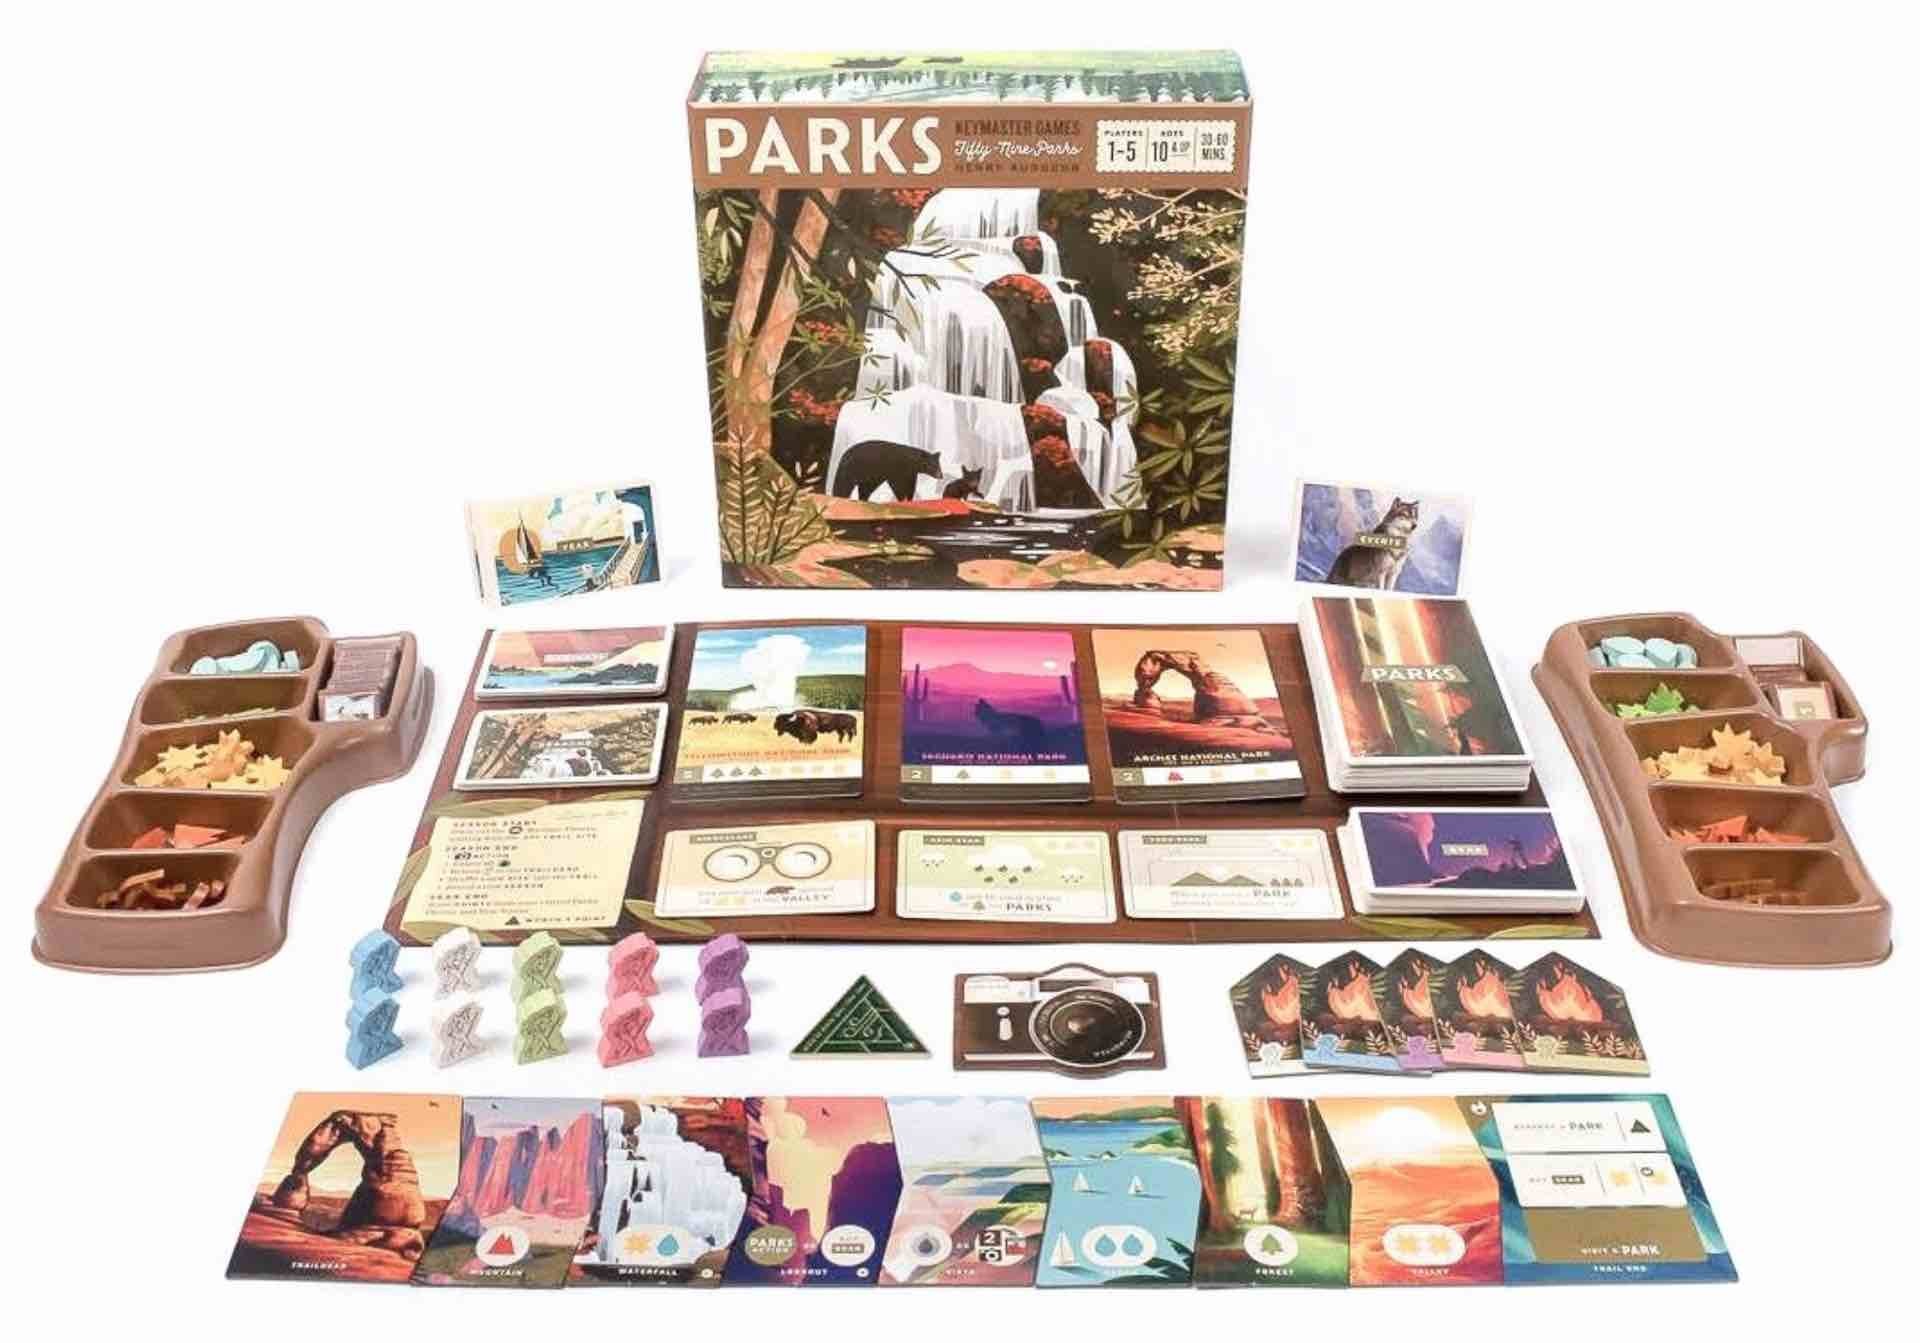 PARKS board game. ($49)